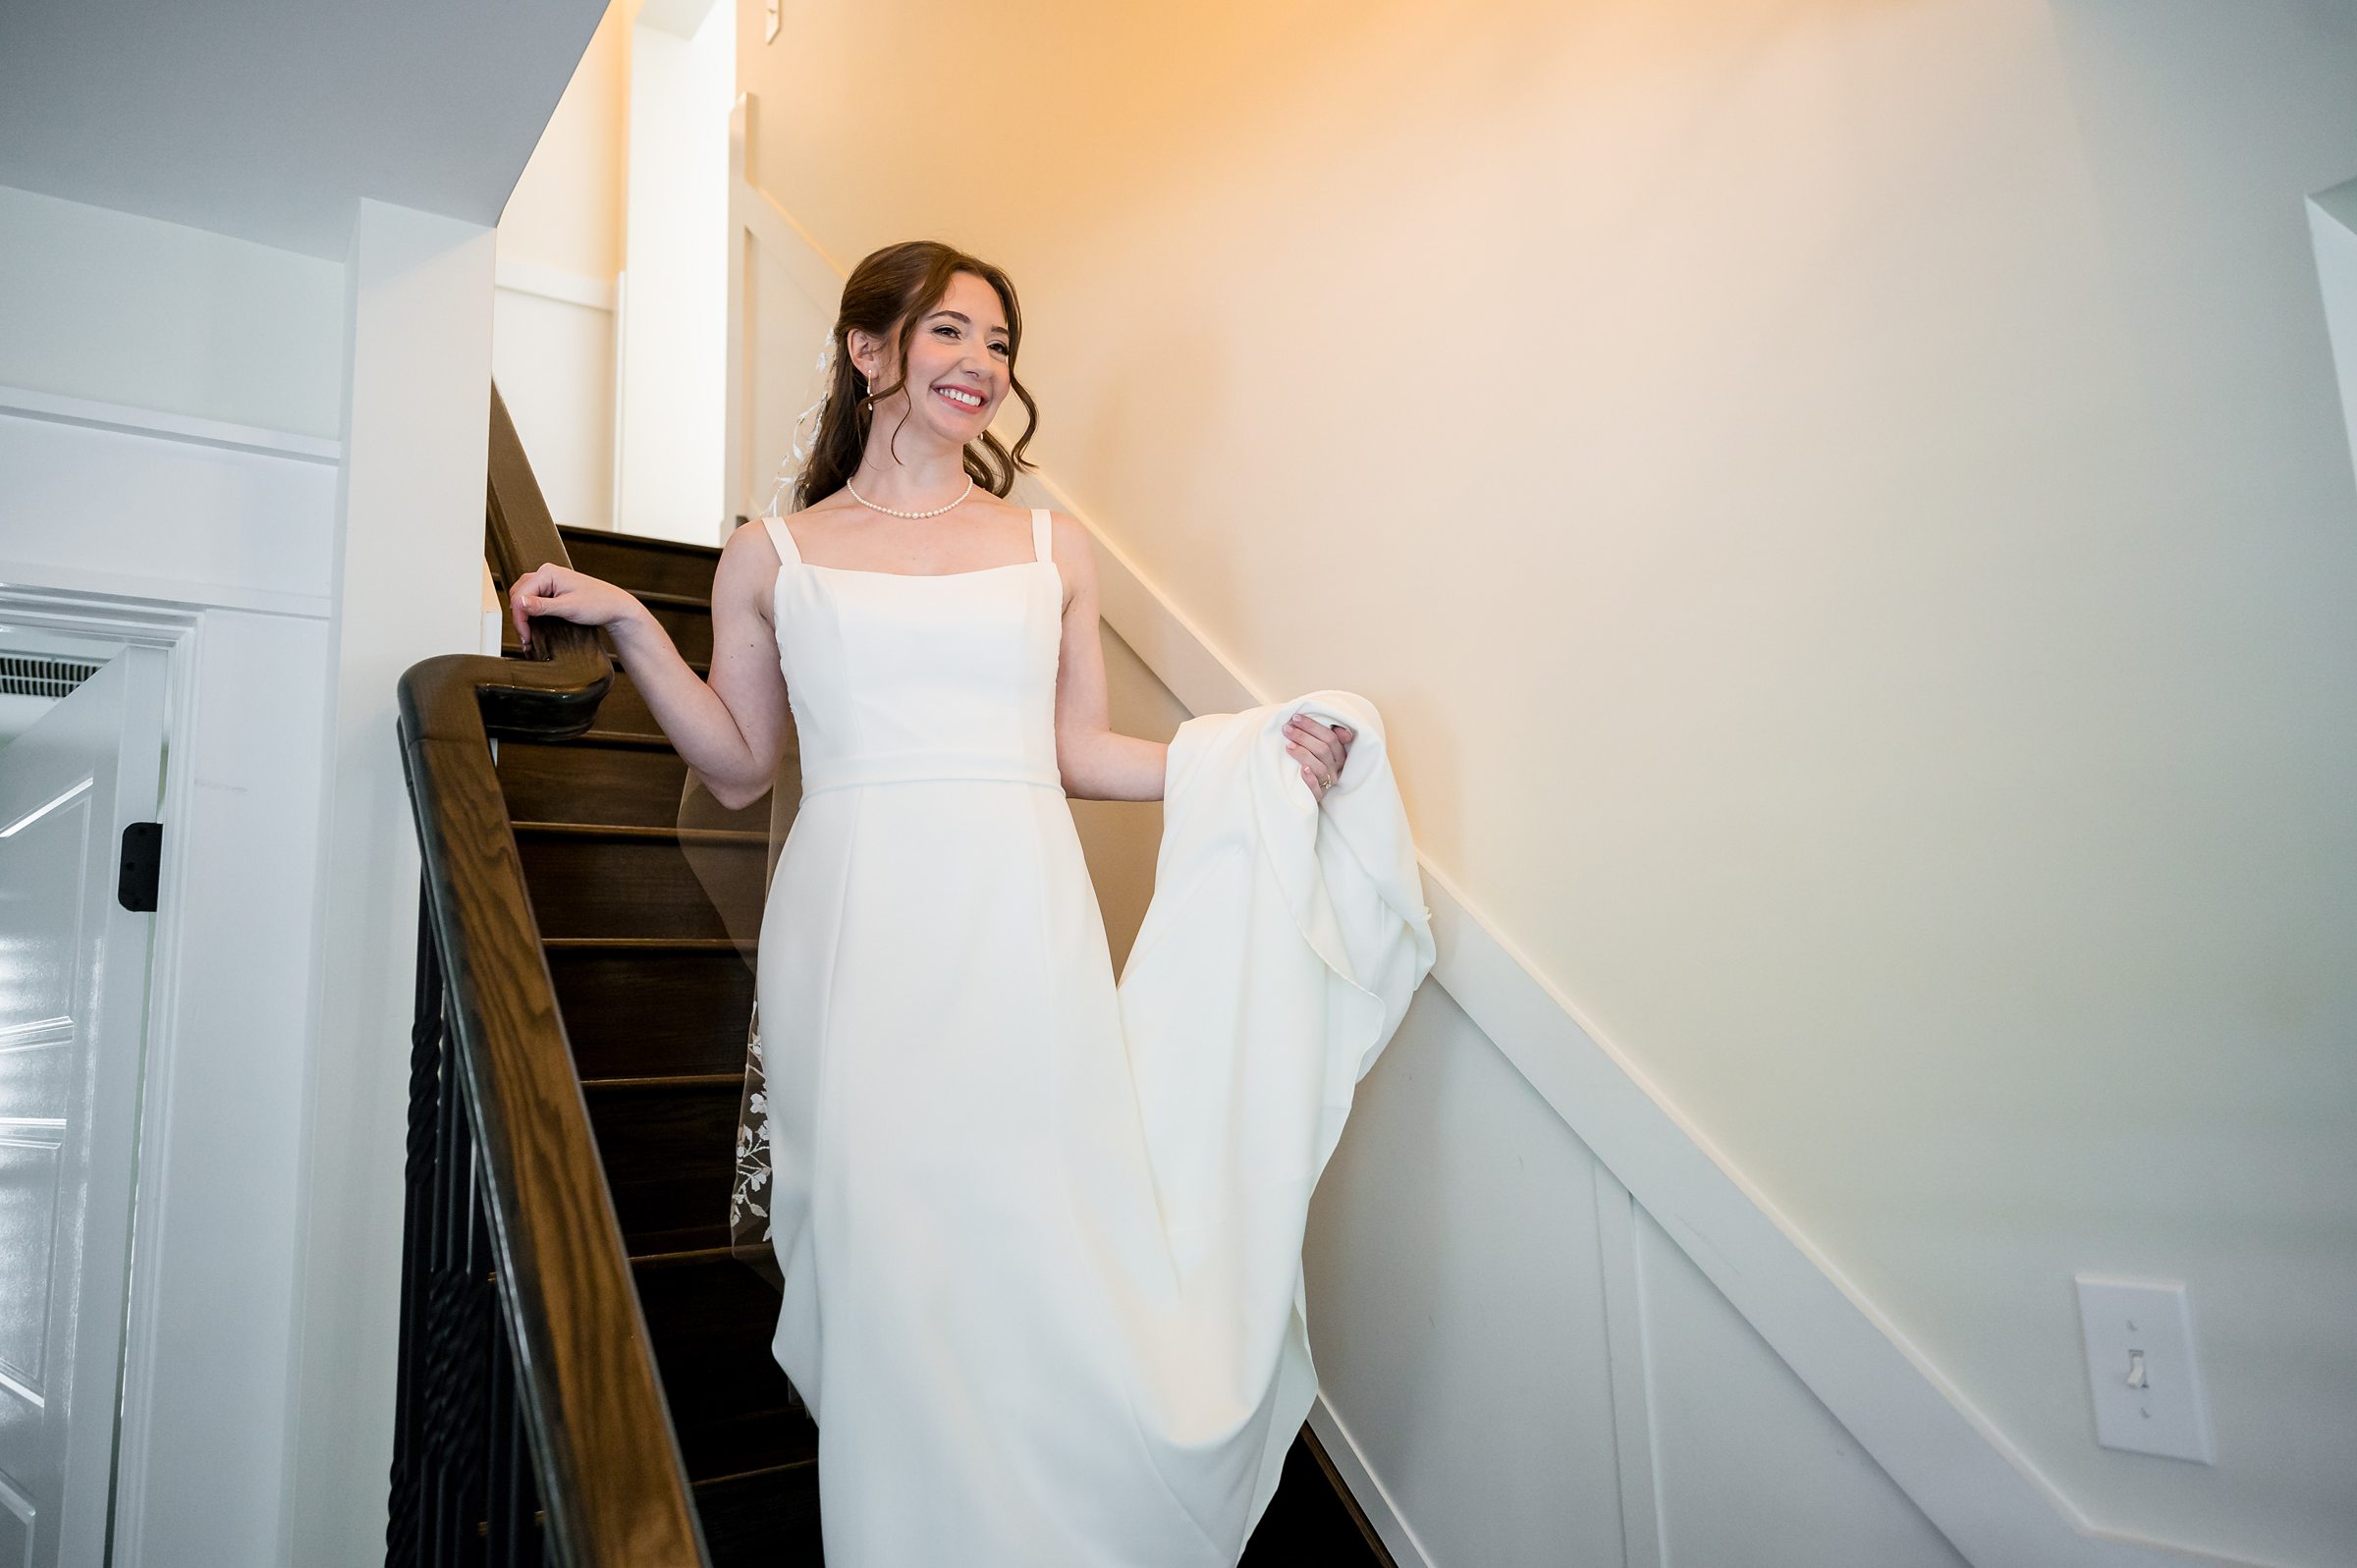 A woman in a white dress descends a wooden staircase with a slight smile.